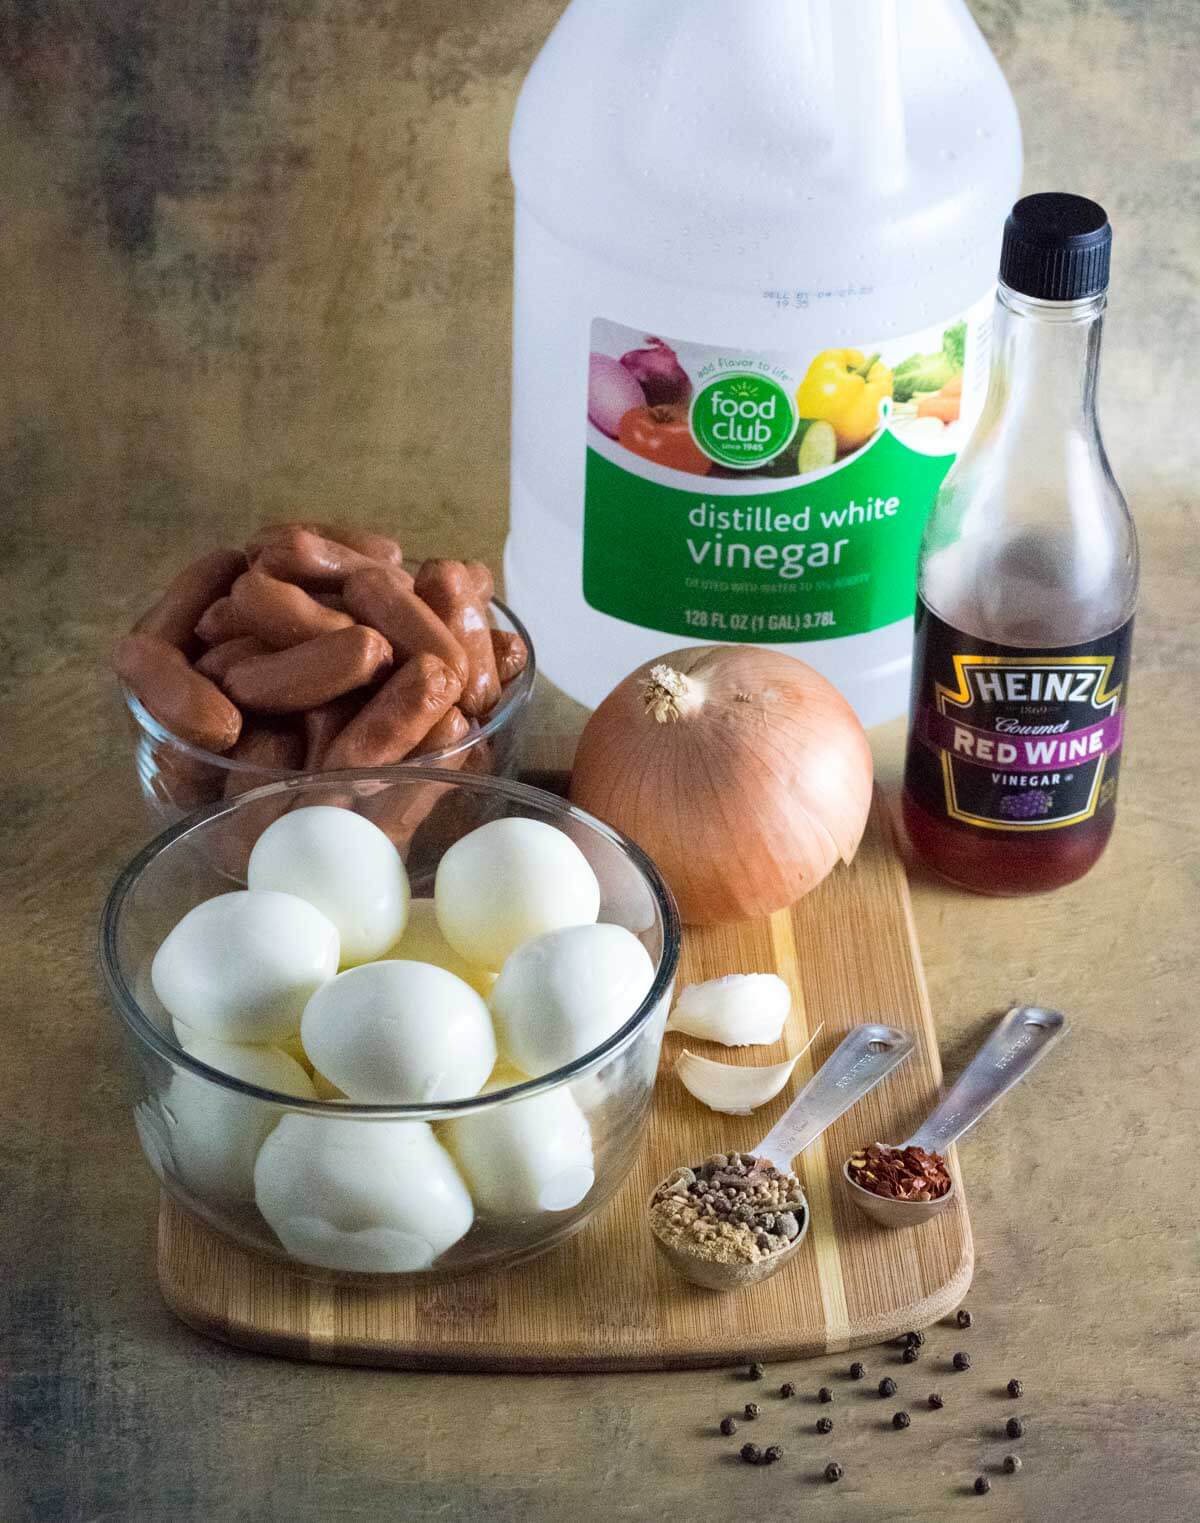 Showing pickled eggs and sausage ingredients.